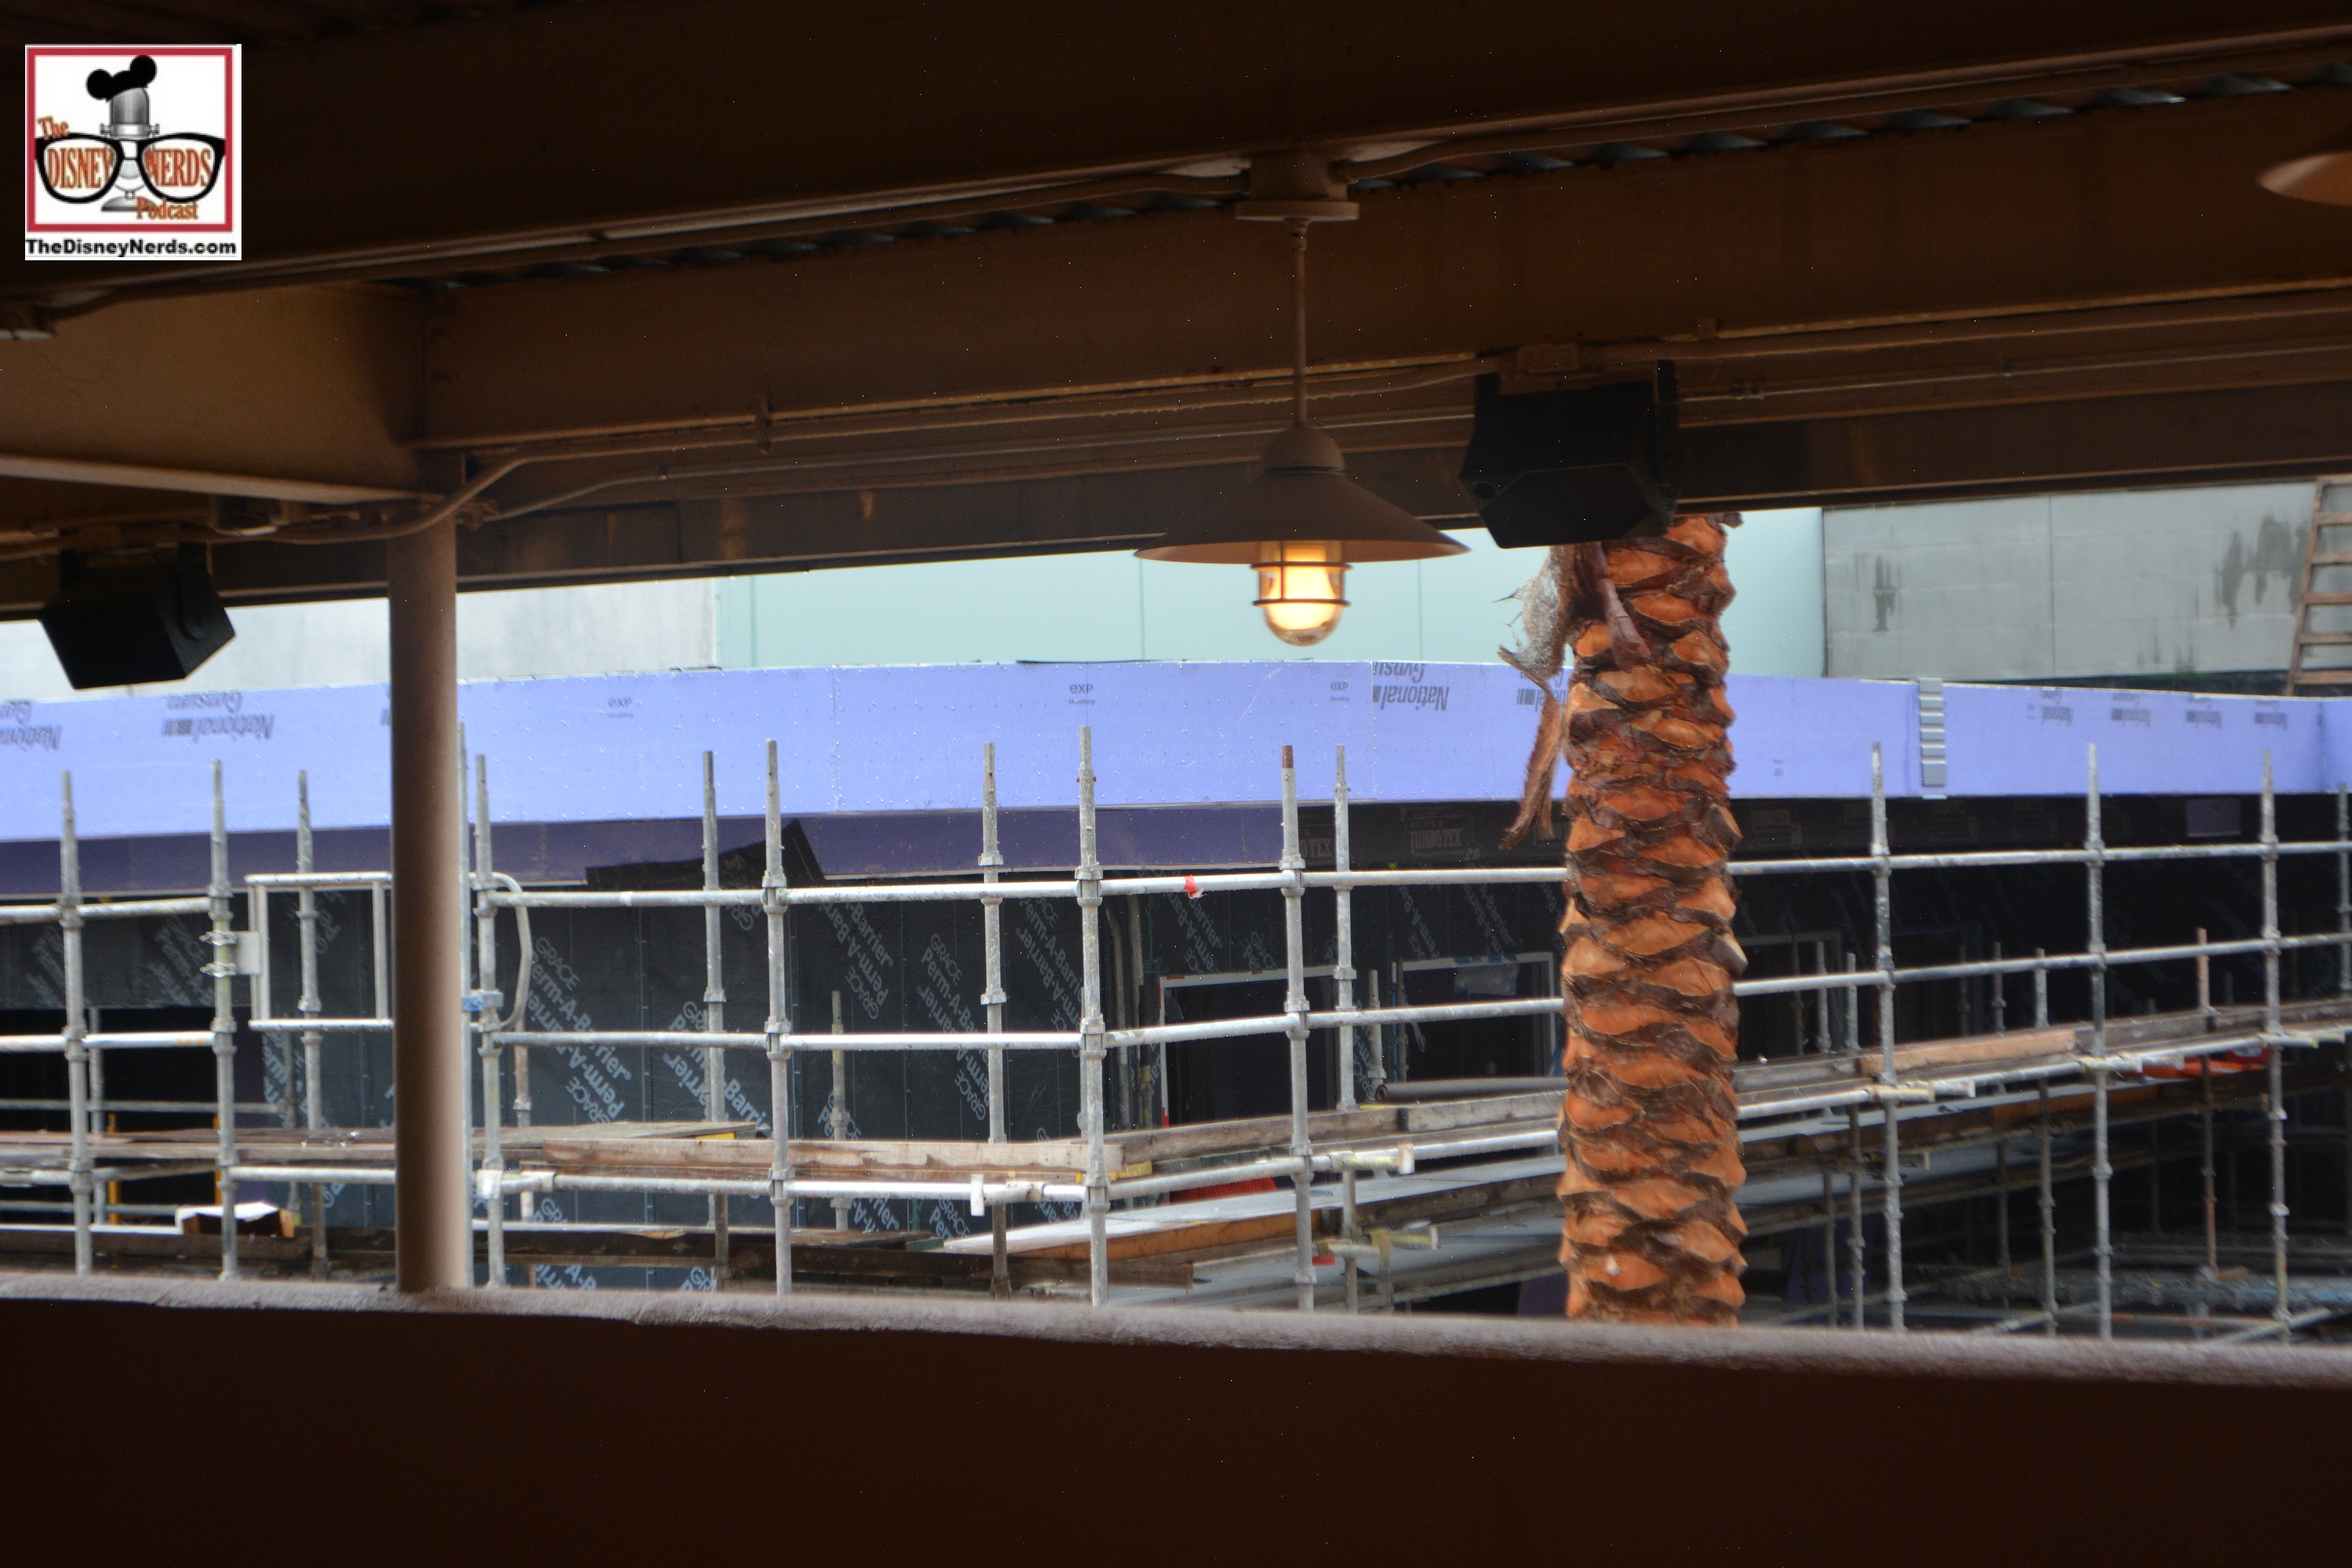 The "Multi Purpose" building is coming along nicely... as seen from the Rock and Roller Coaster Queue.